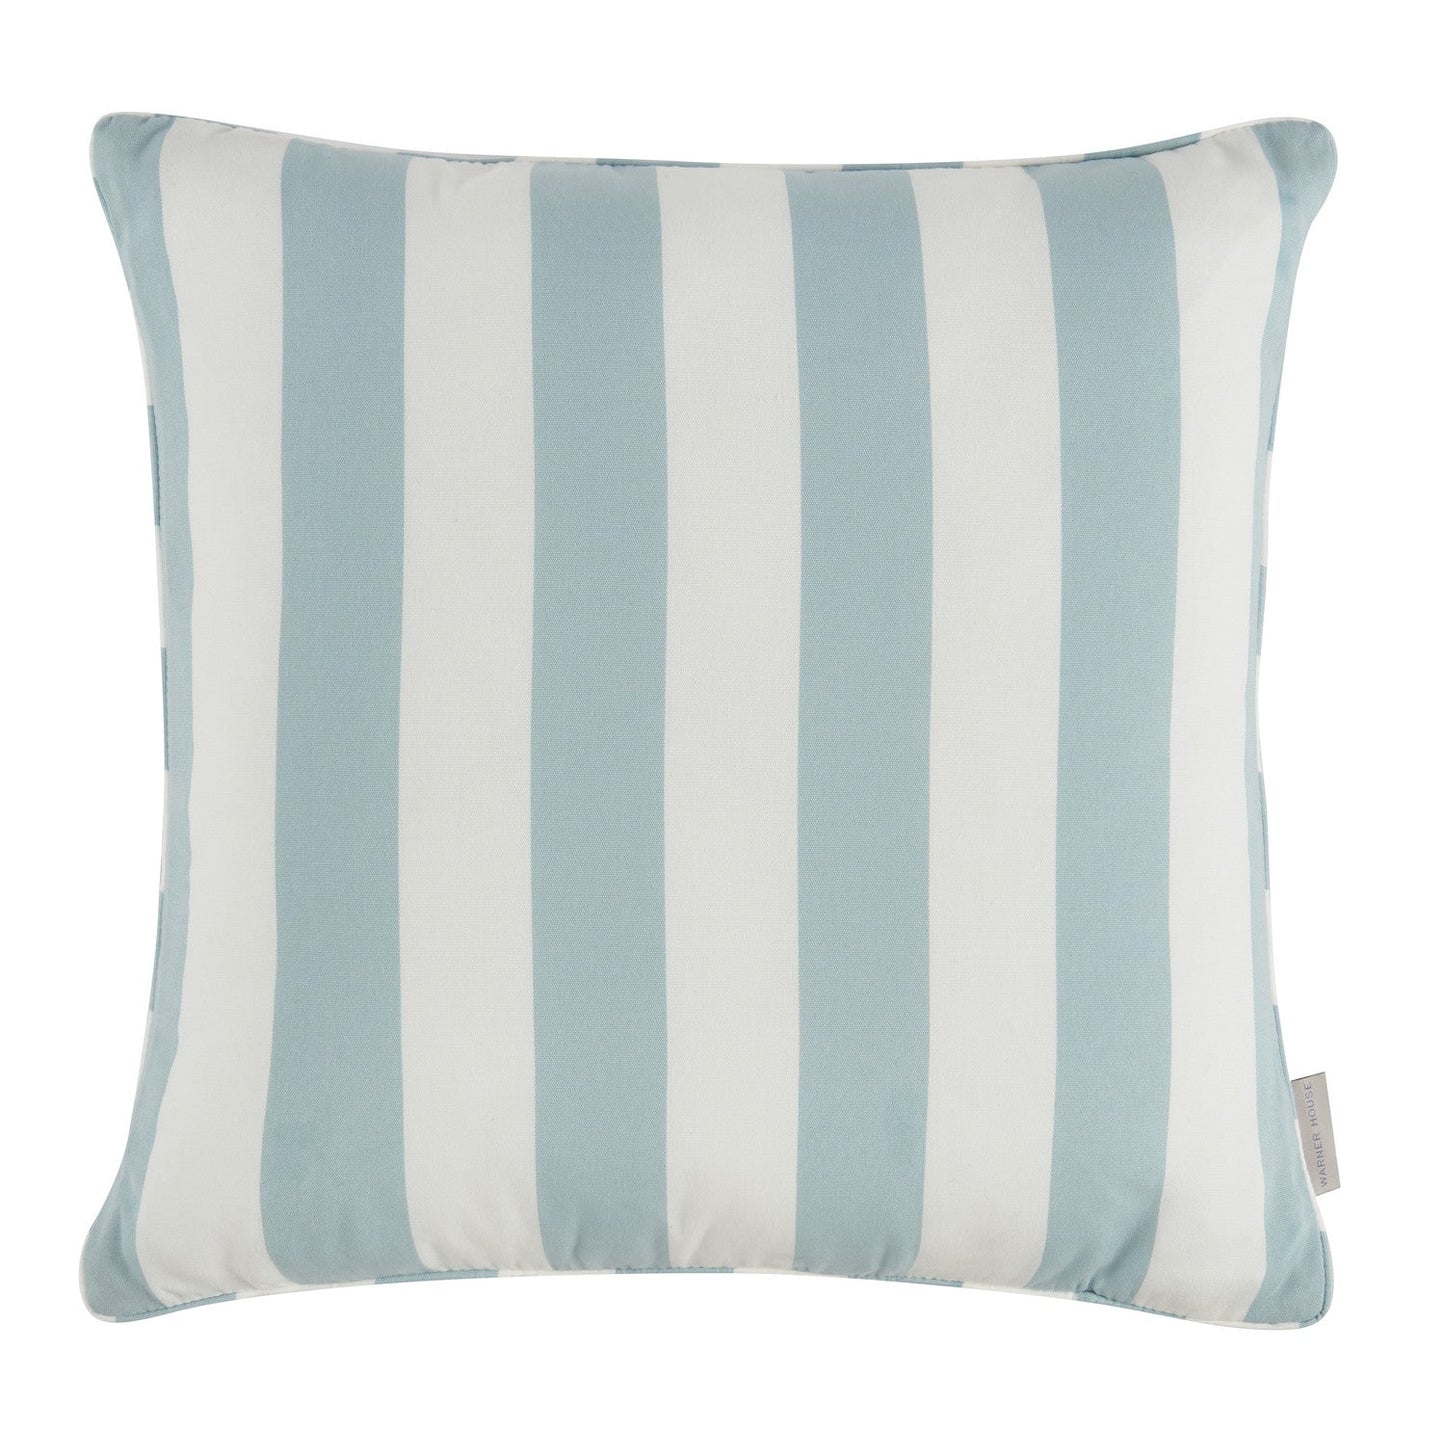 HOLKHAM Mineral Outdoor Cushion - Warner House